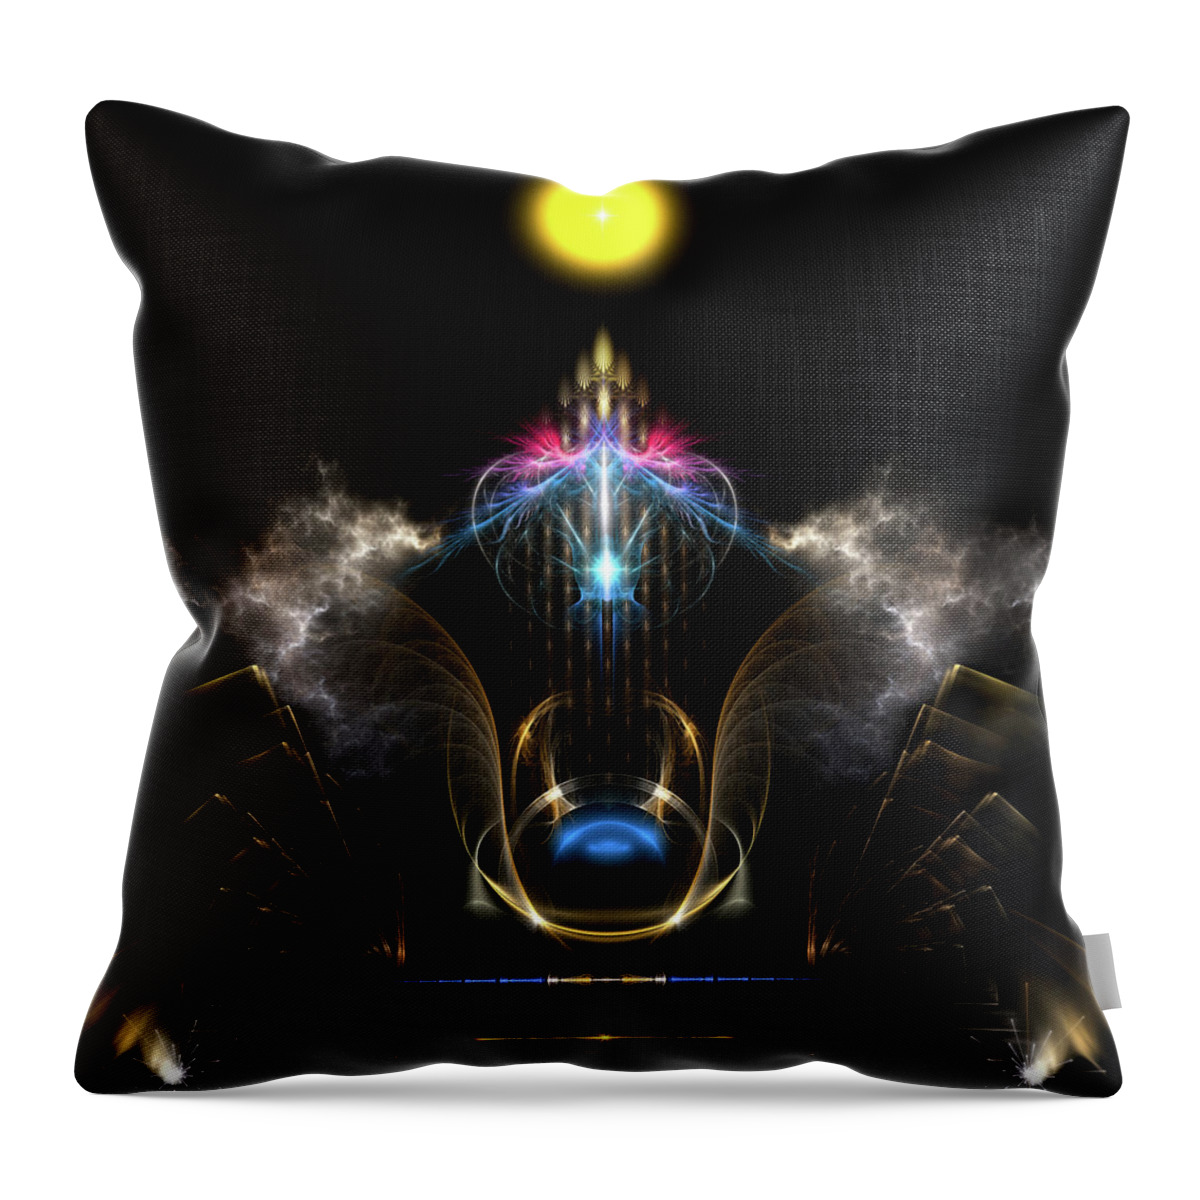 Blue Pearl Throw Pillow featuring the digital art Blue Pearl And The Treasure Of Light Fractal Art by Rolando Burbon